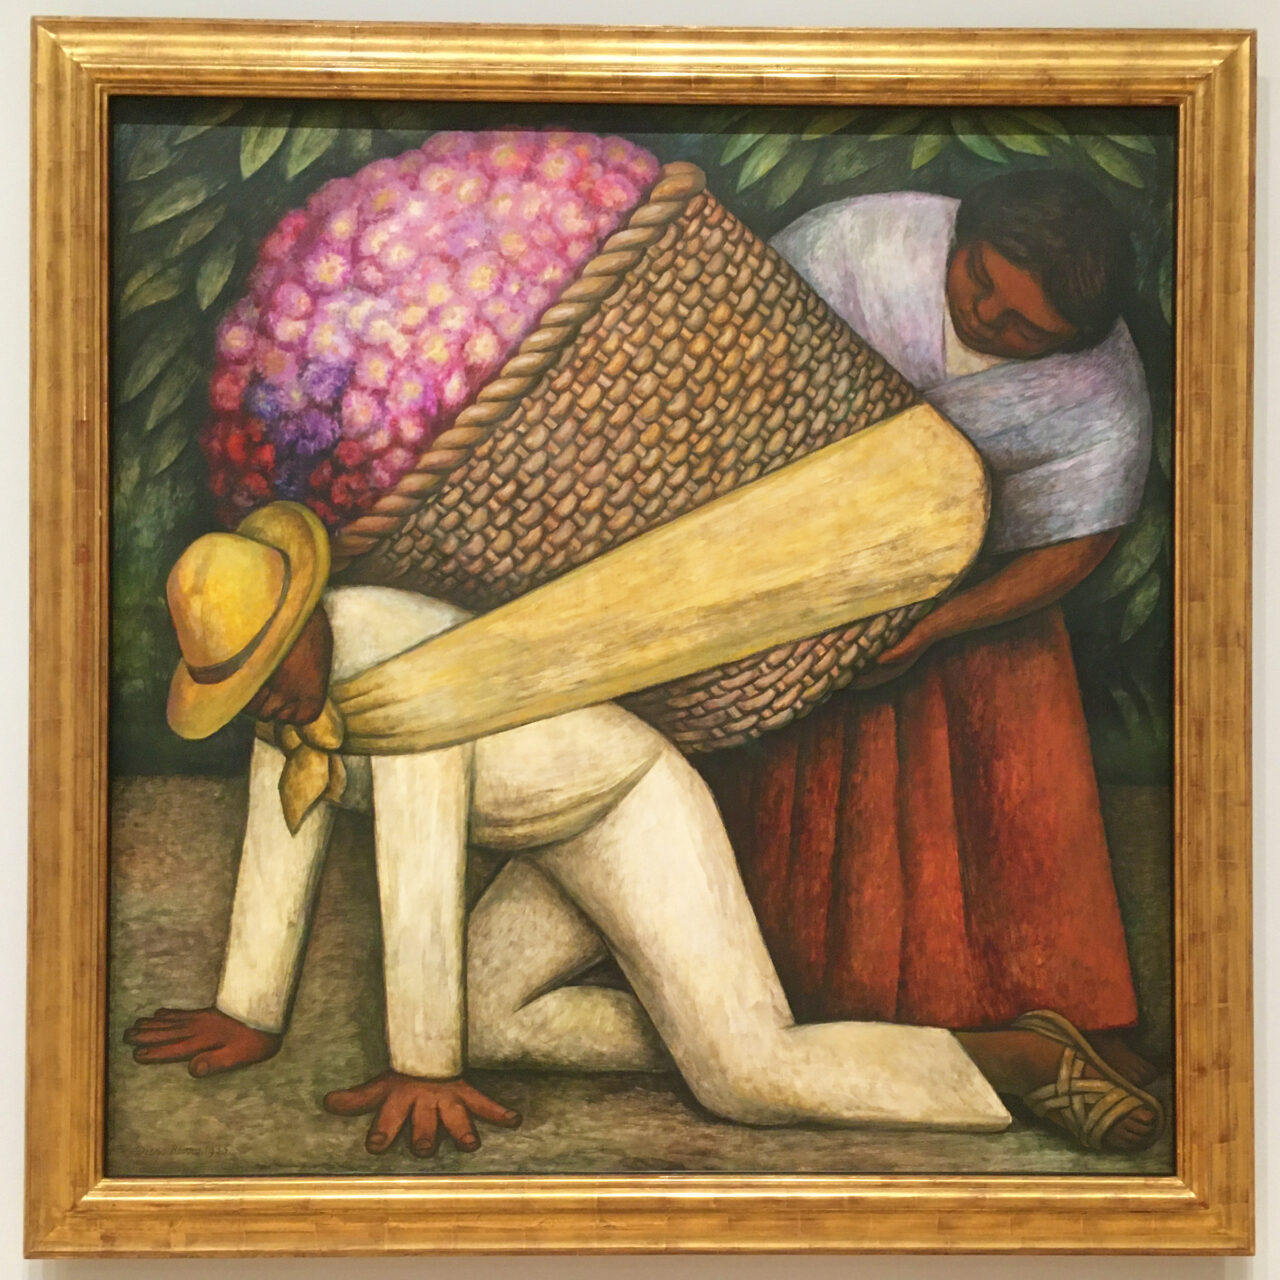 The Flower Carrier at SFMOMA by Mexican muralist Diego Rivera, 1935.